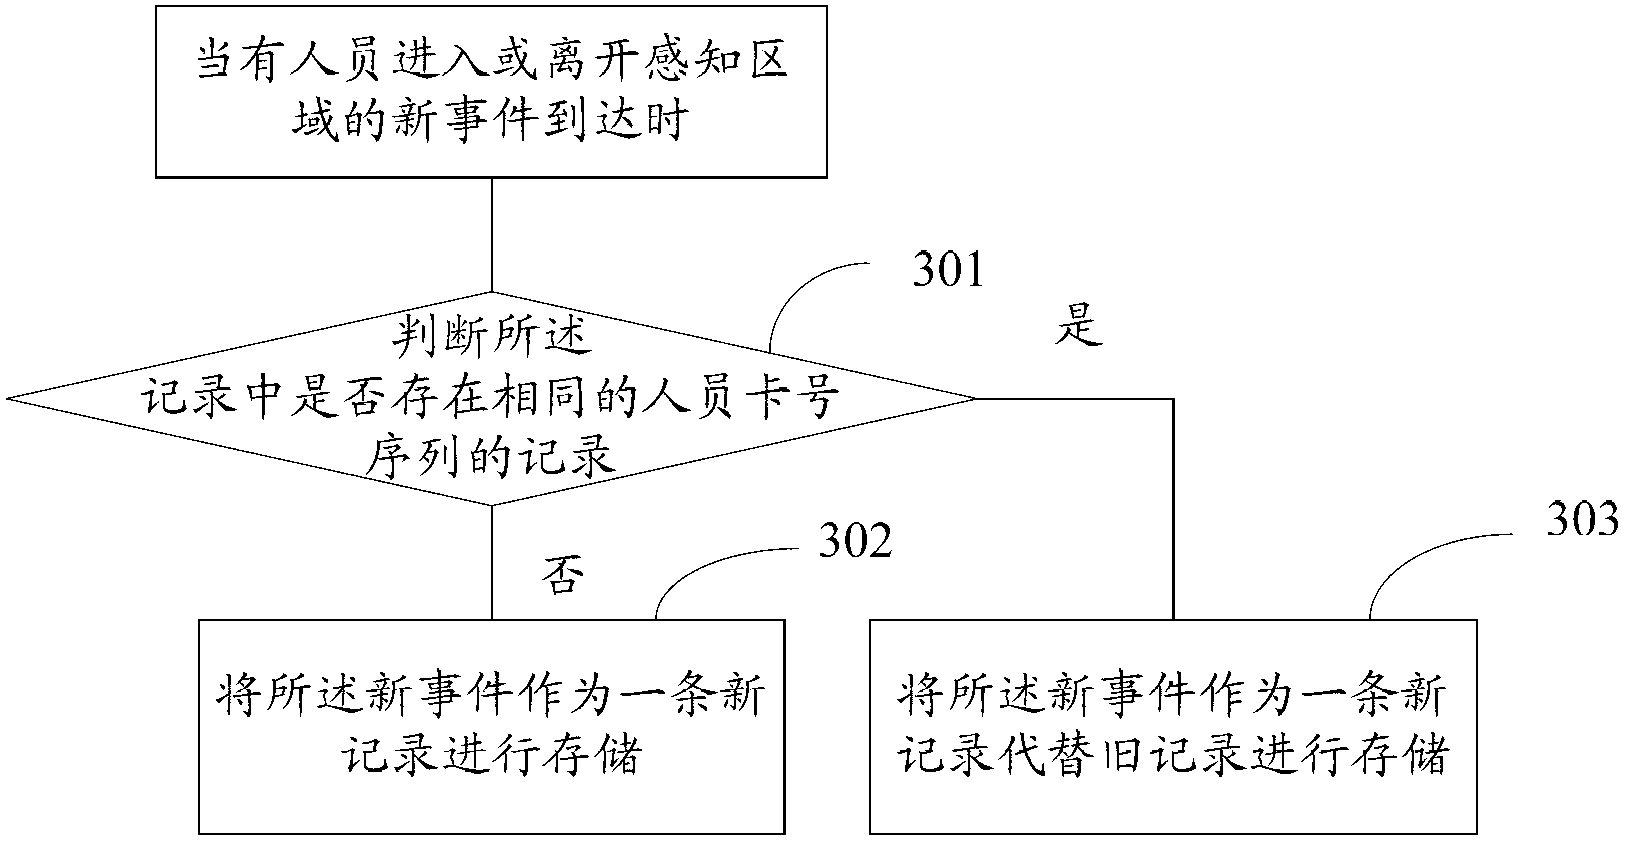 Method and system for personnel location